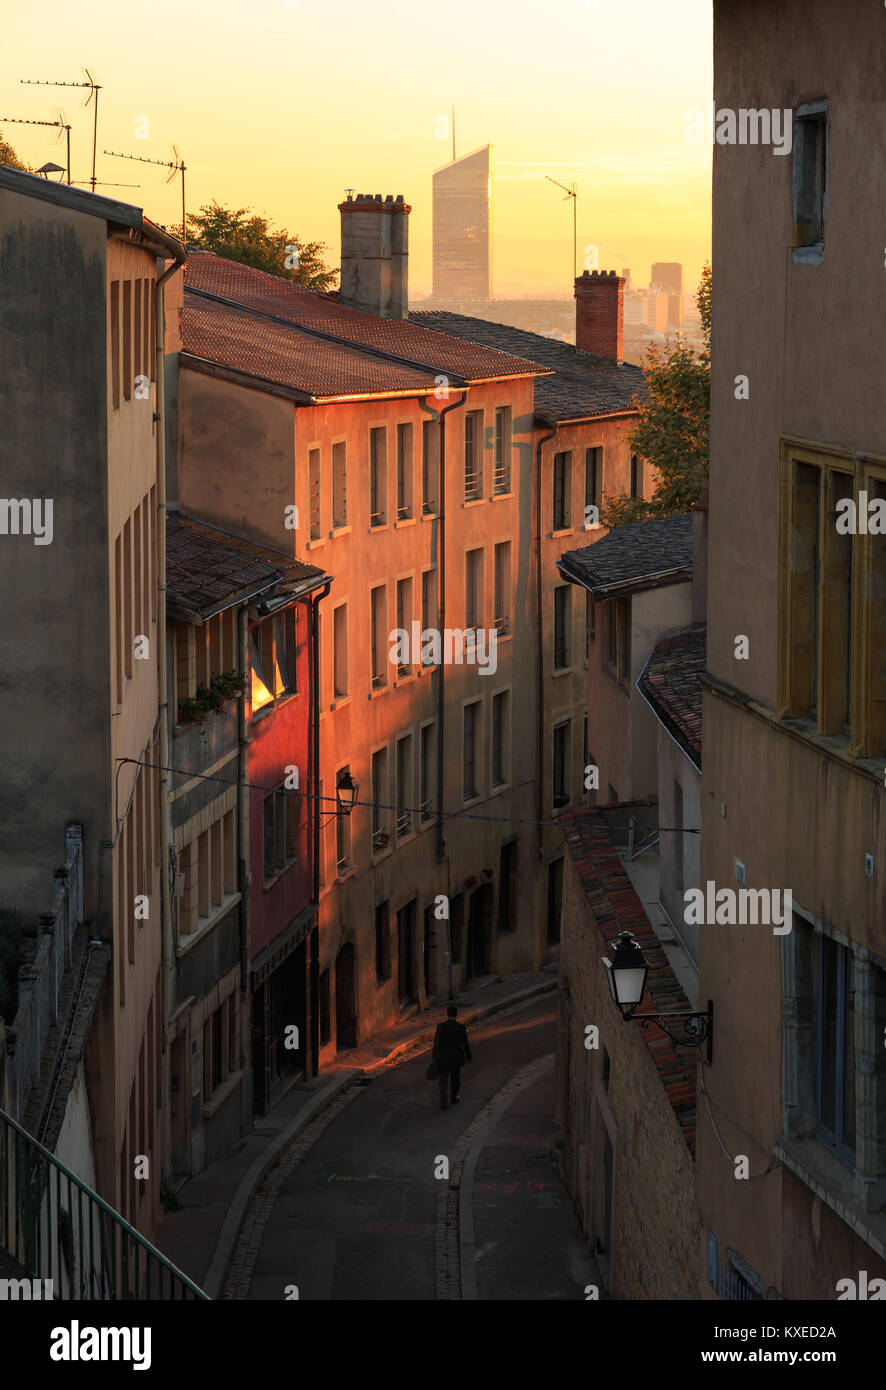 A man walking in a charming alley in Vieux Lyon, the old town of Lyon, during sunrise. Stock Photo